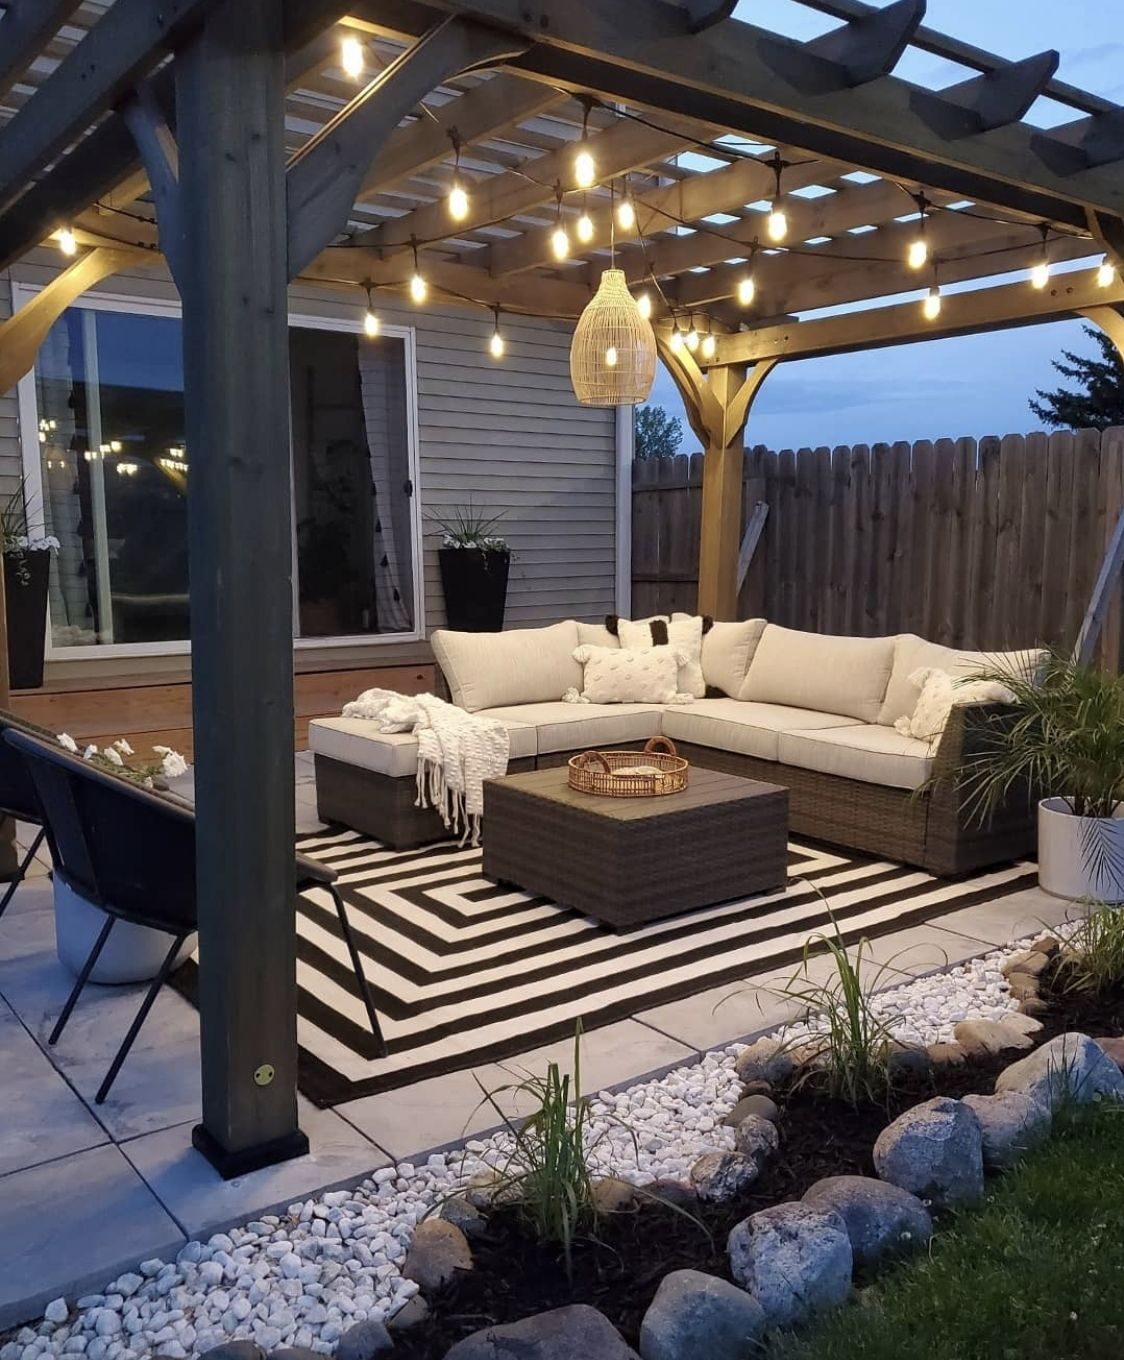 Creative Ways to Transform Your Outdoor Patio into a Relaxing Oasis